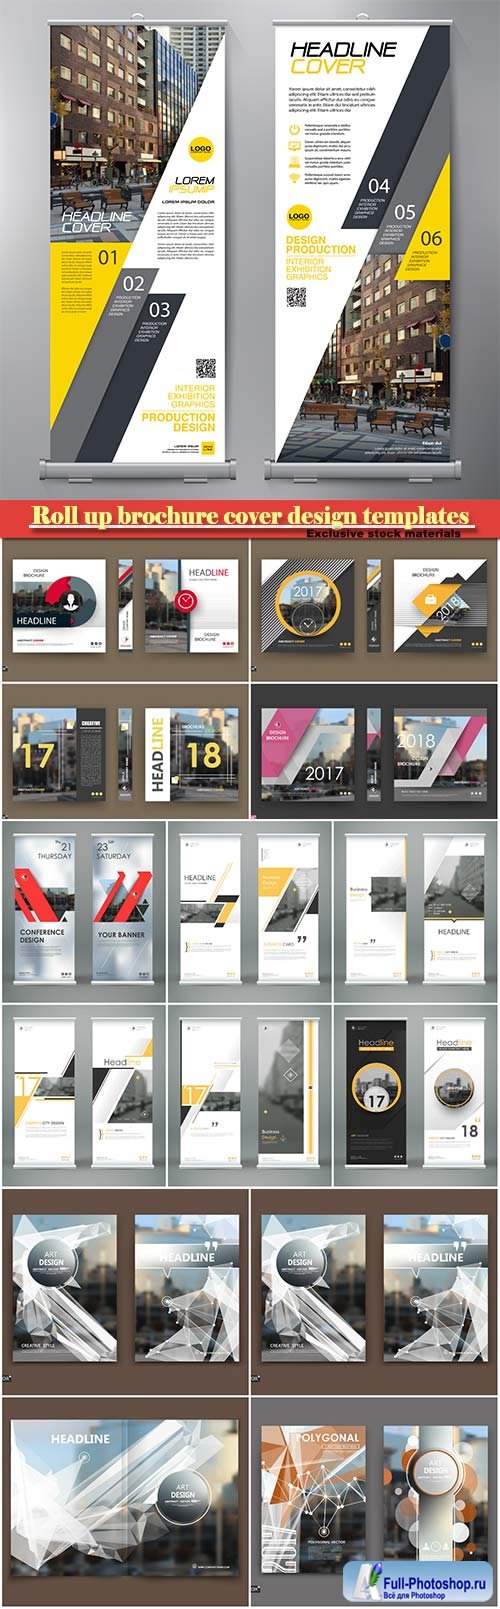 Roll up brochure cover design templates